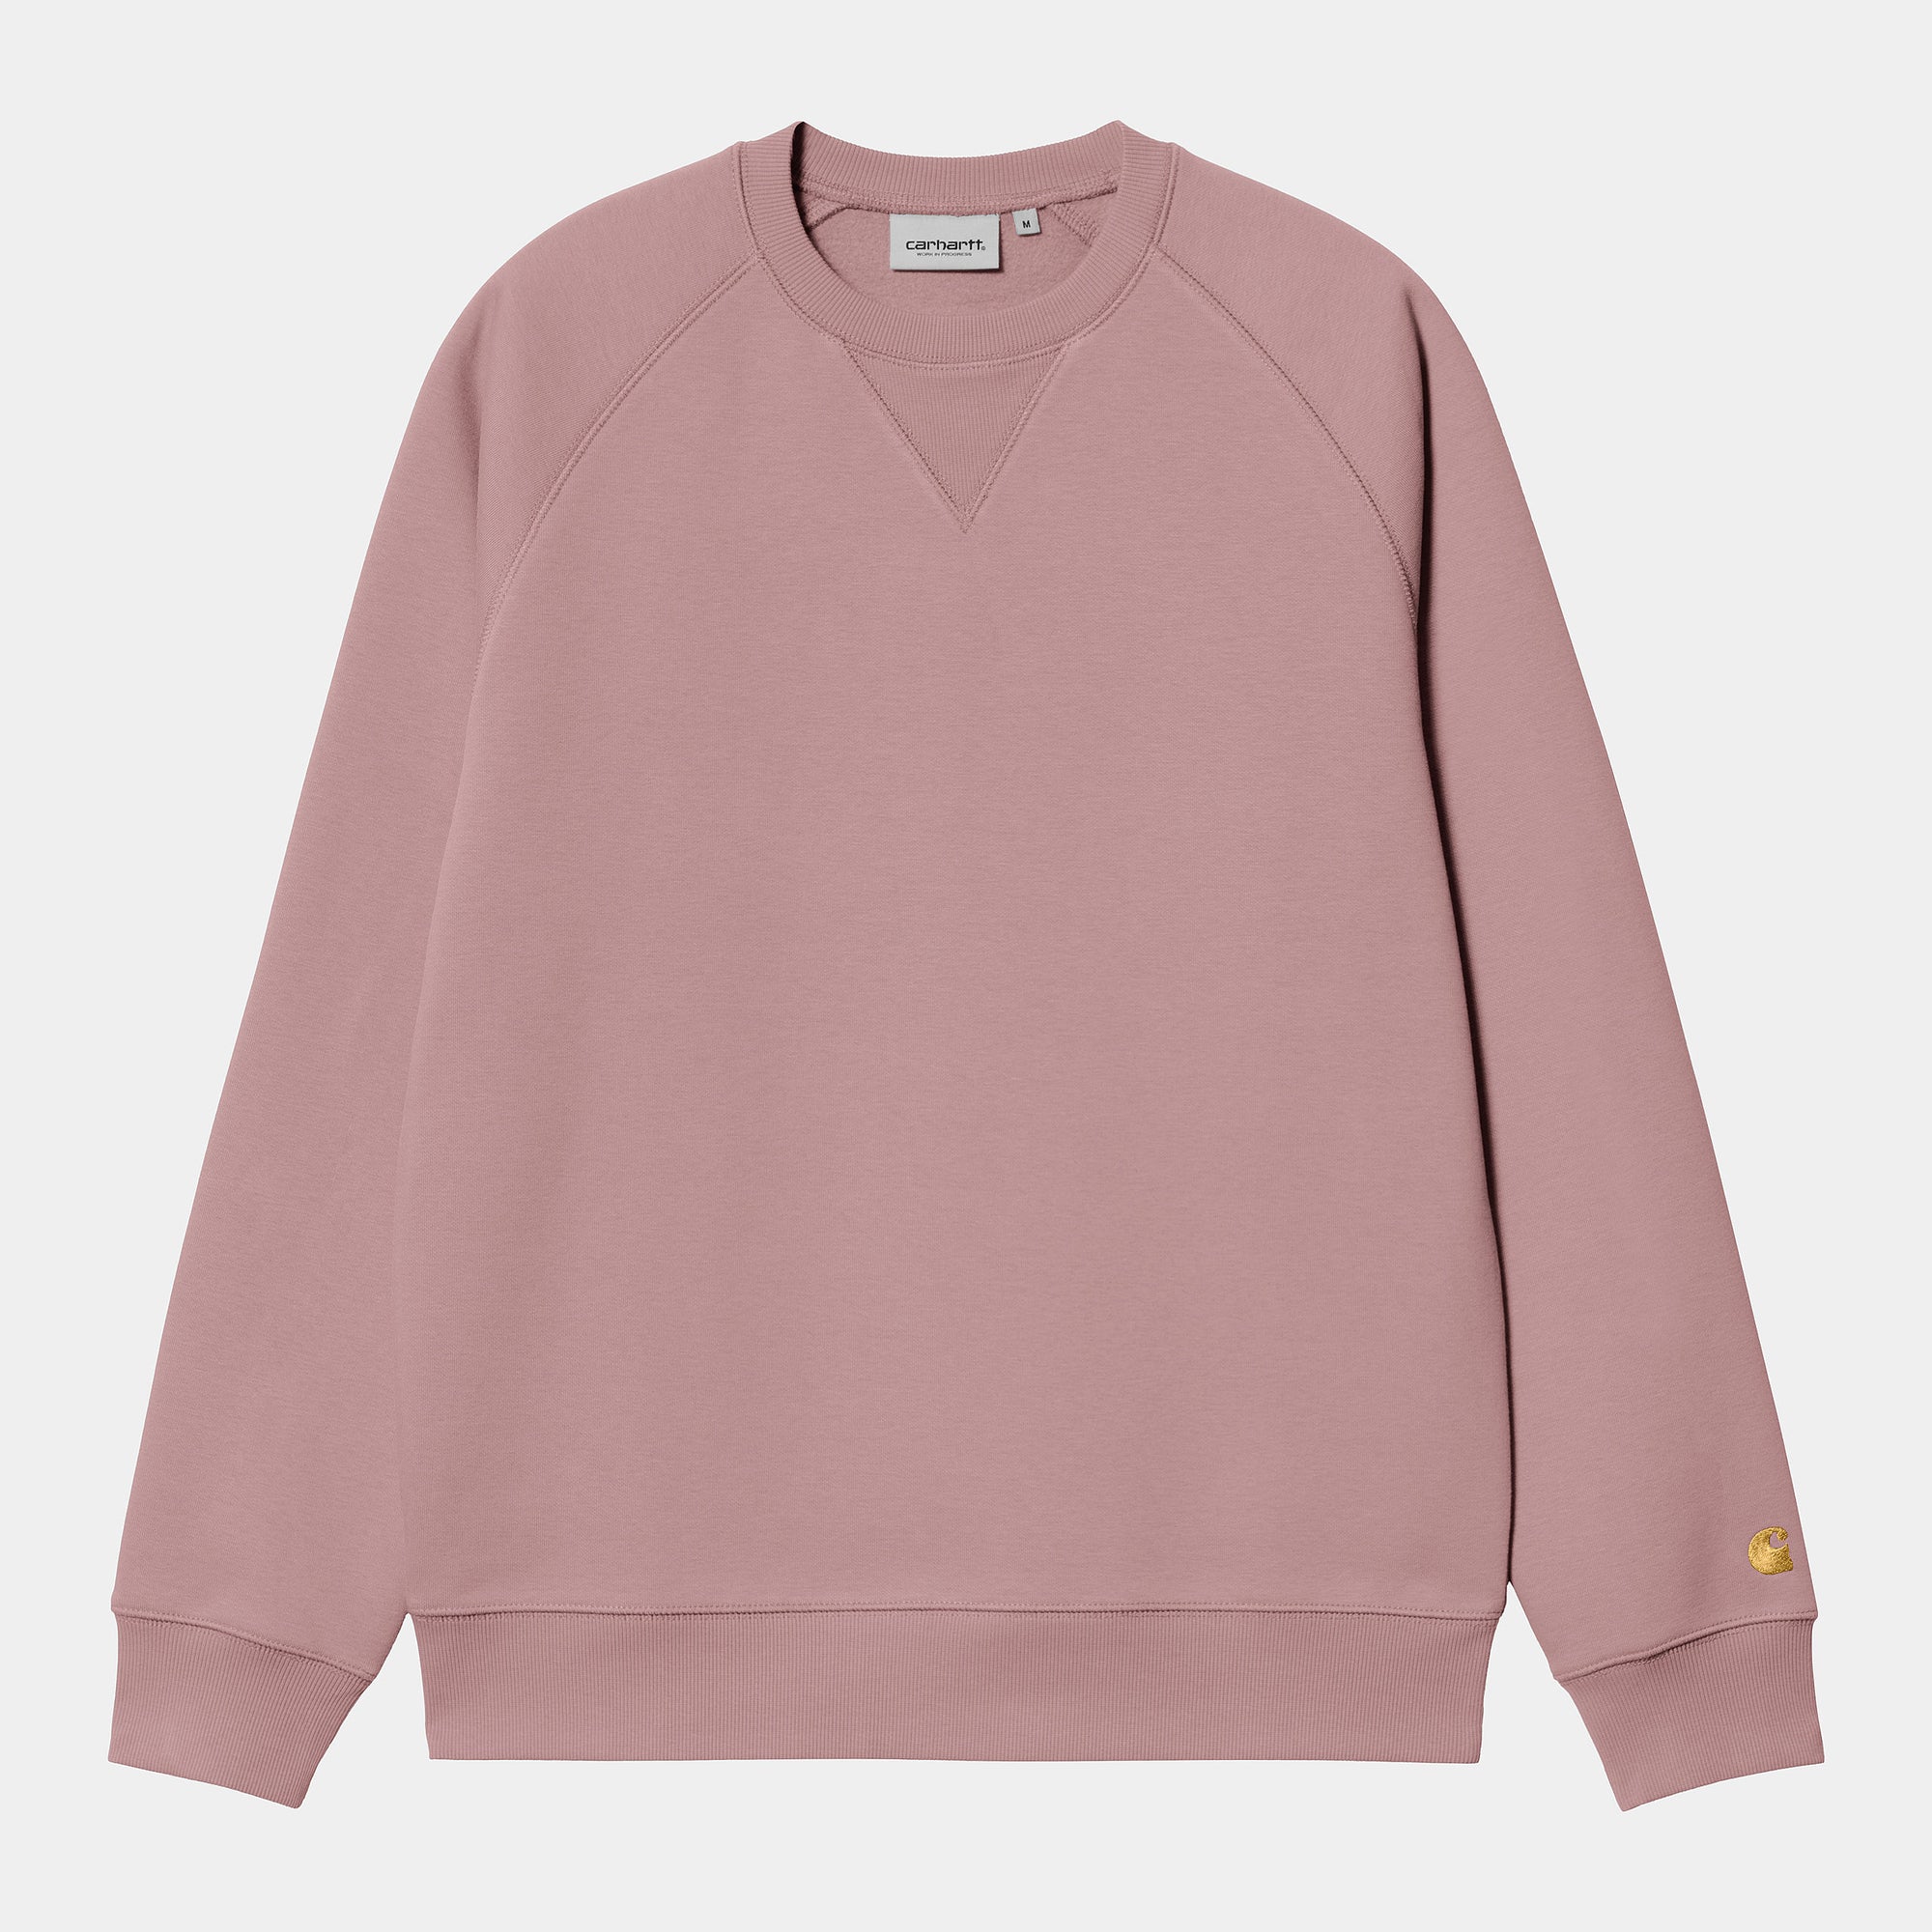 Carhartt WIP Chase Sweat - Glassy Pink / Gold